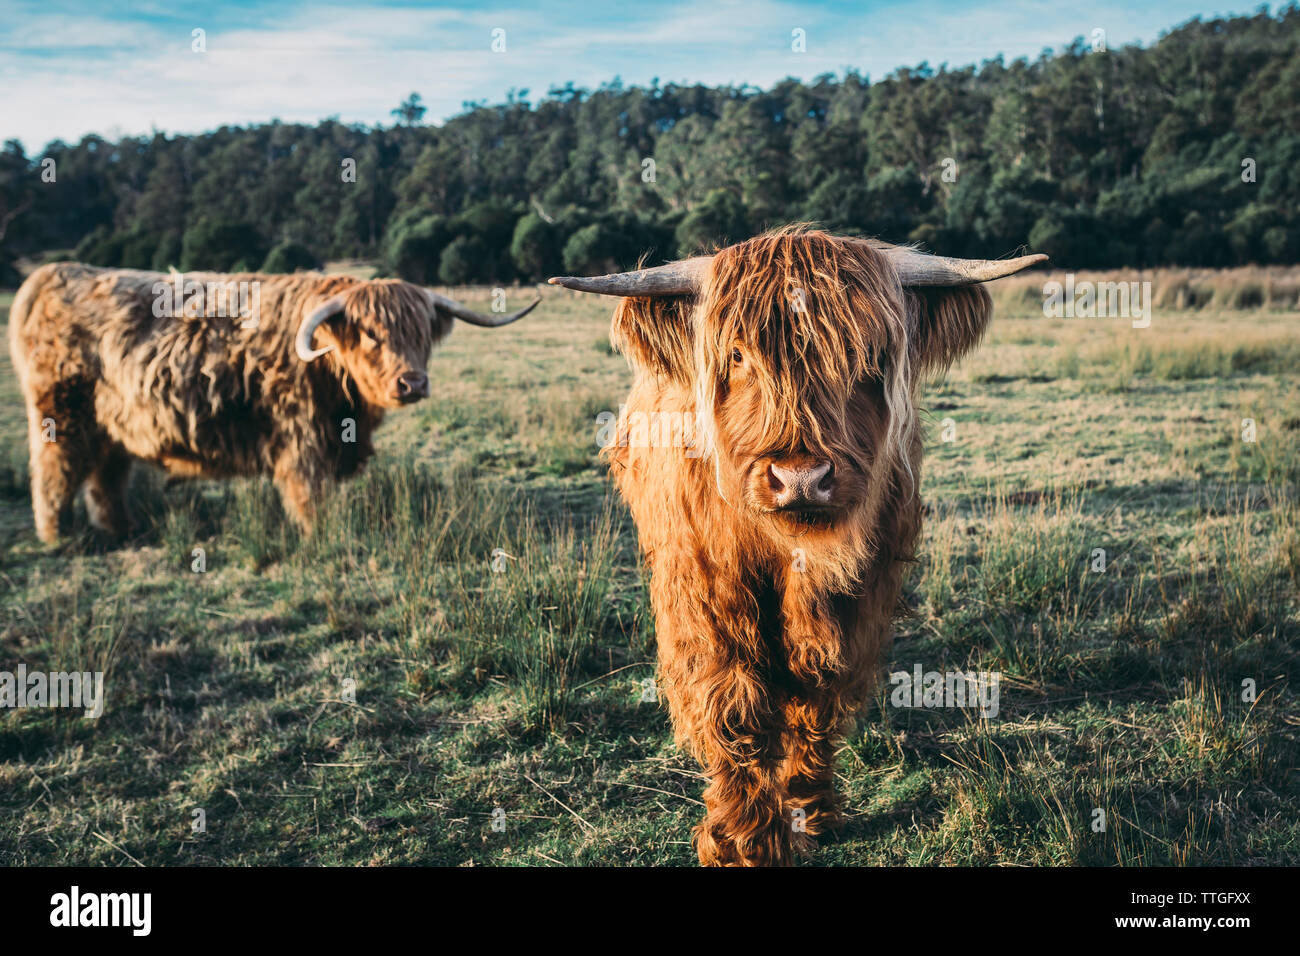 Highland cattles grazing at grassy field Stock Photo